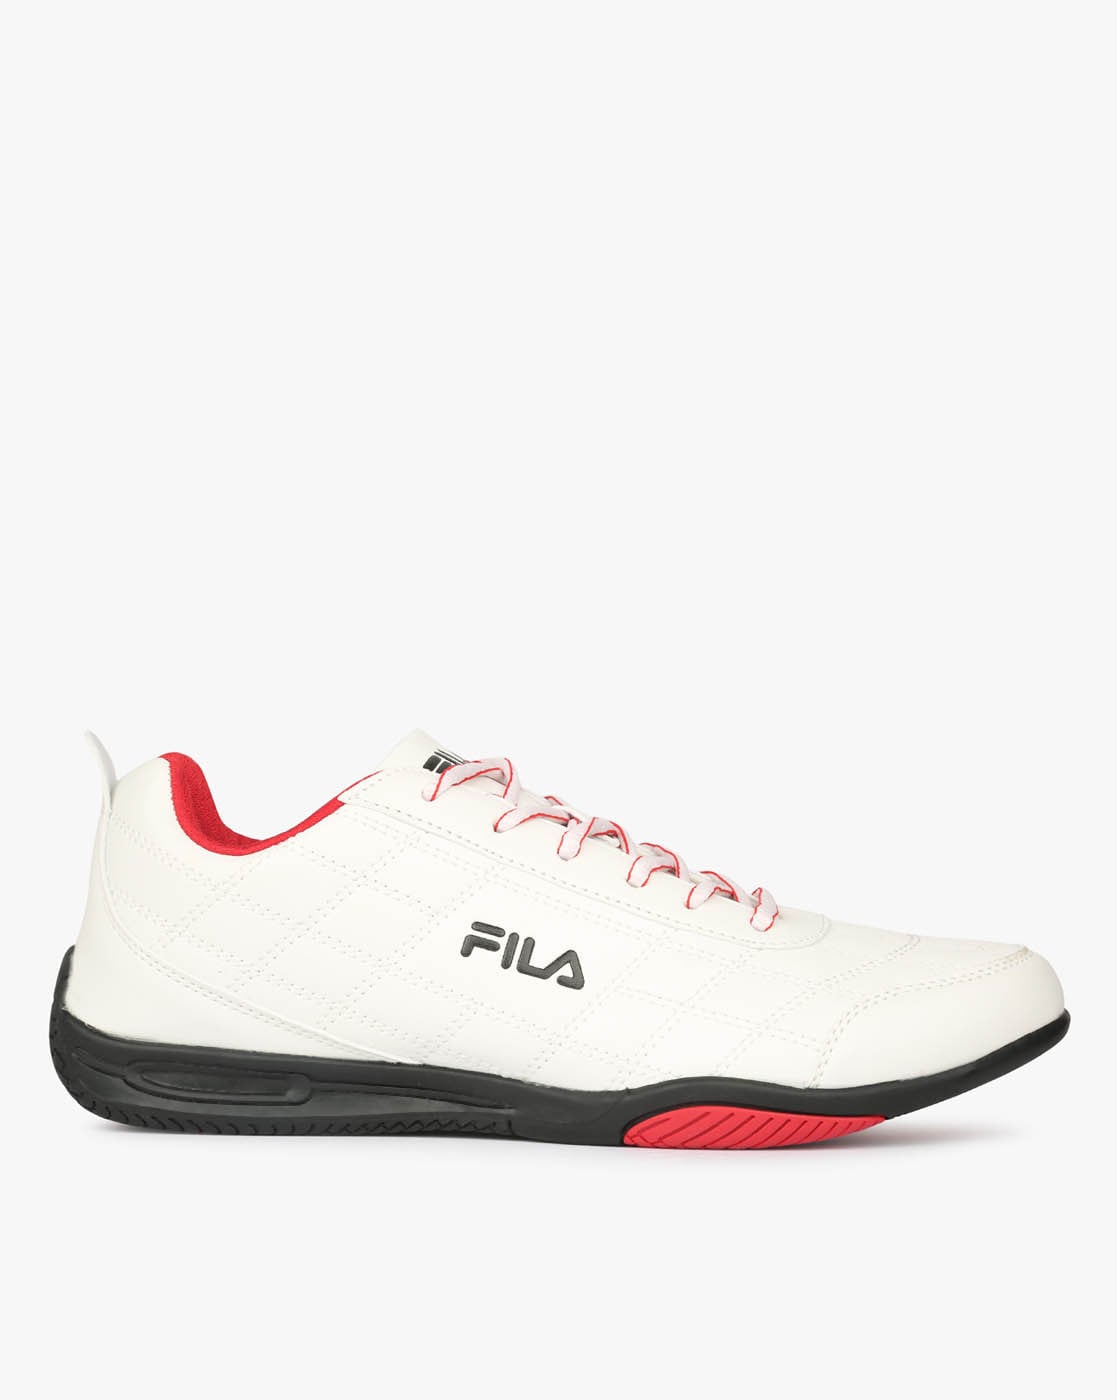 fila sports shoes without laces